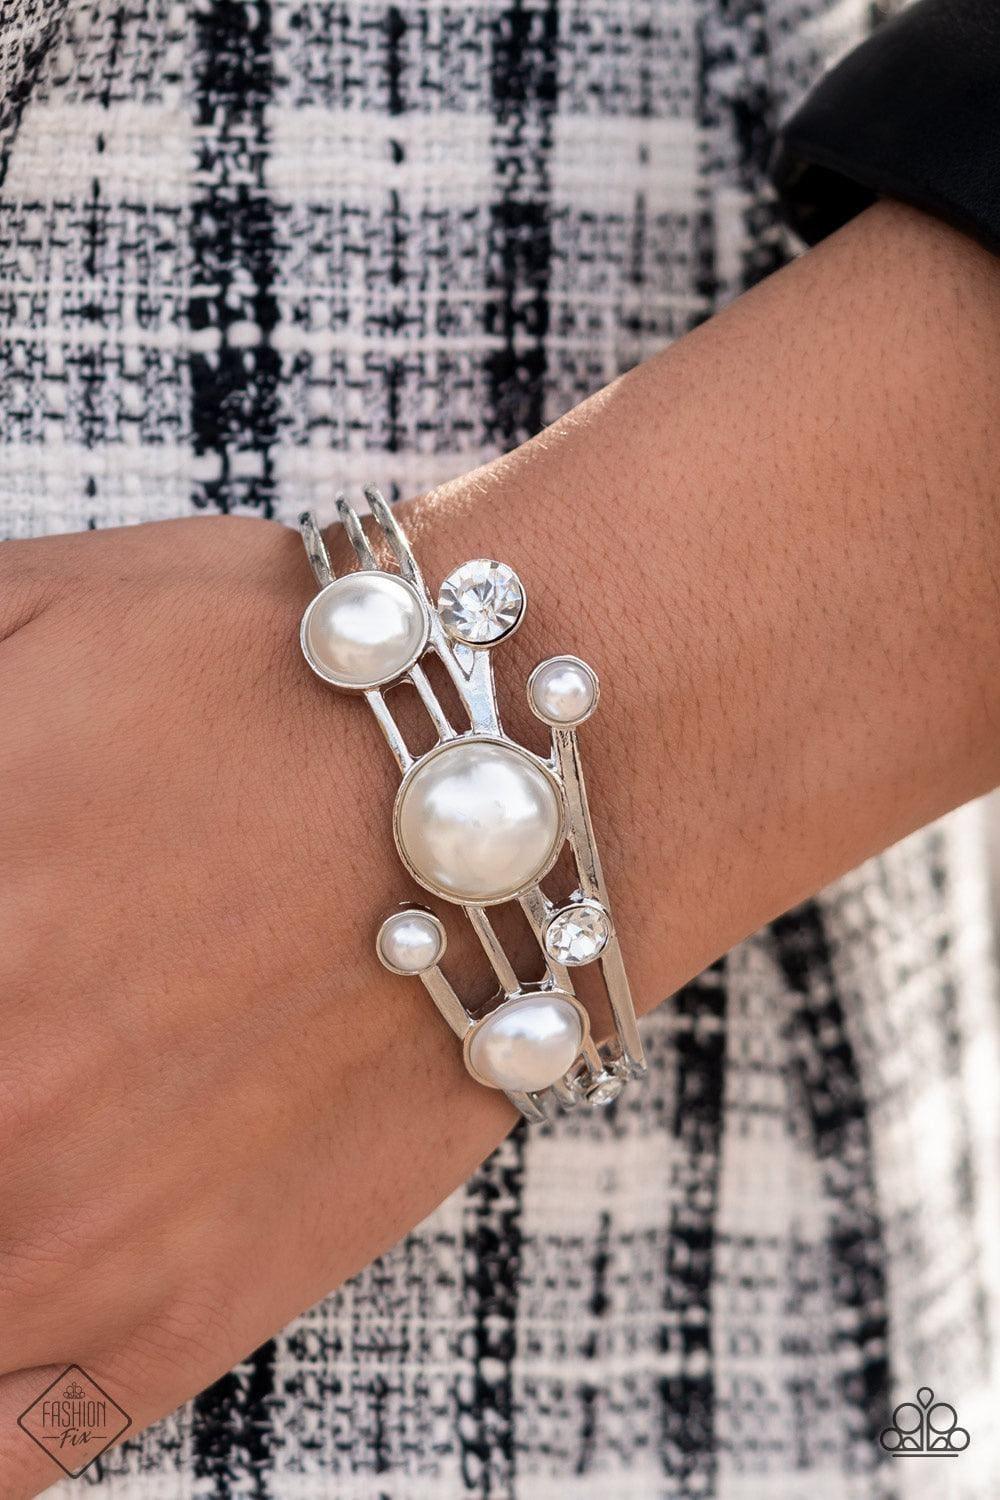 Paparazzi Accessories - Total Sail-out - White Bracelet - Bling by JessieK